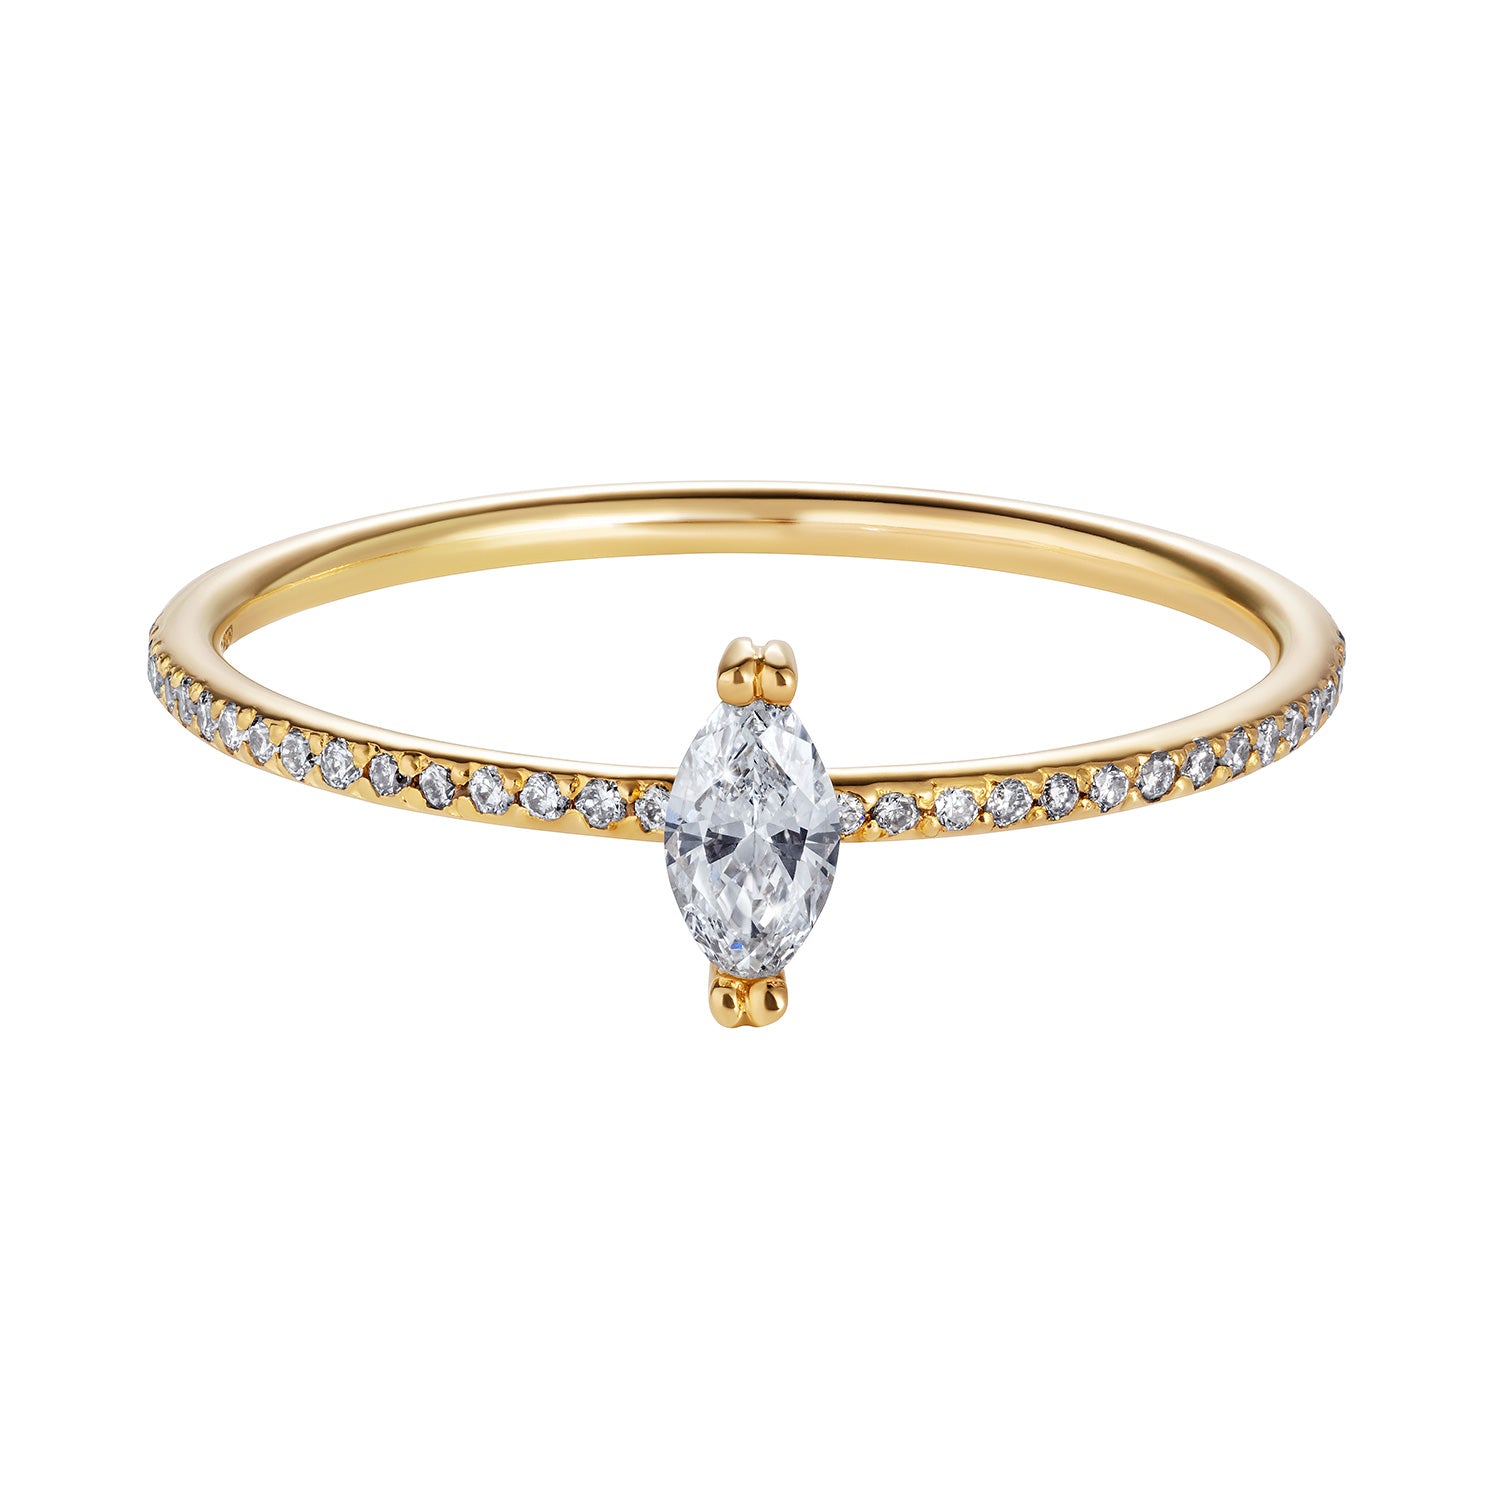 Sweet Pea 18ct yellow gold marquise diamond engagement ring with a full set diamond eternity band.  